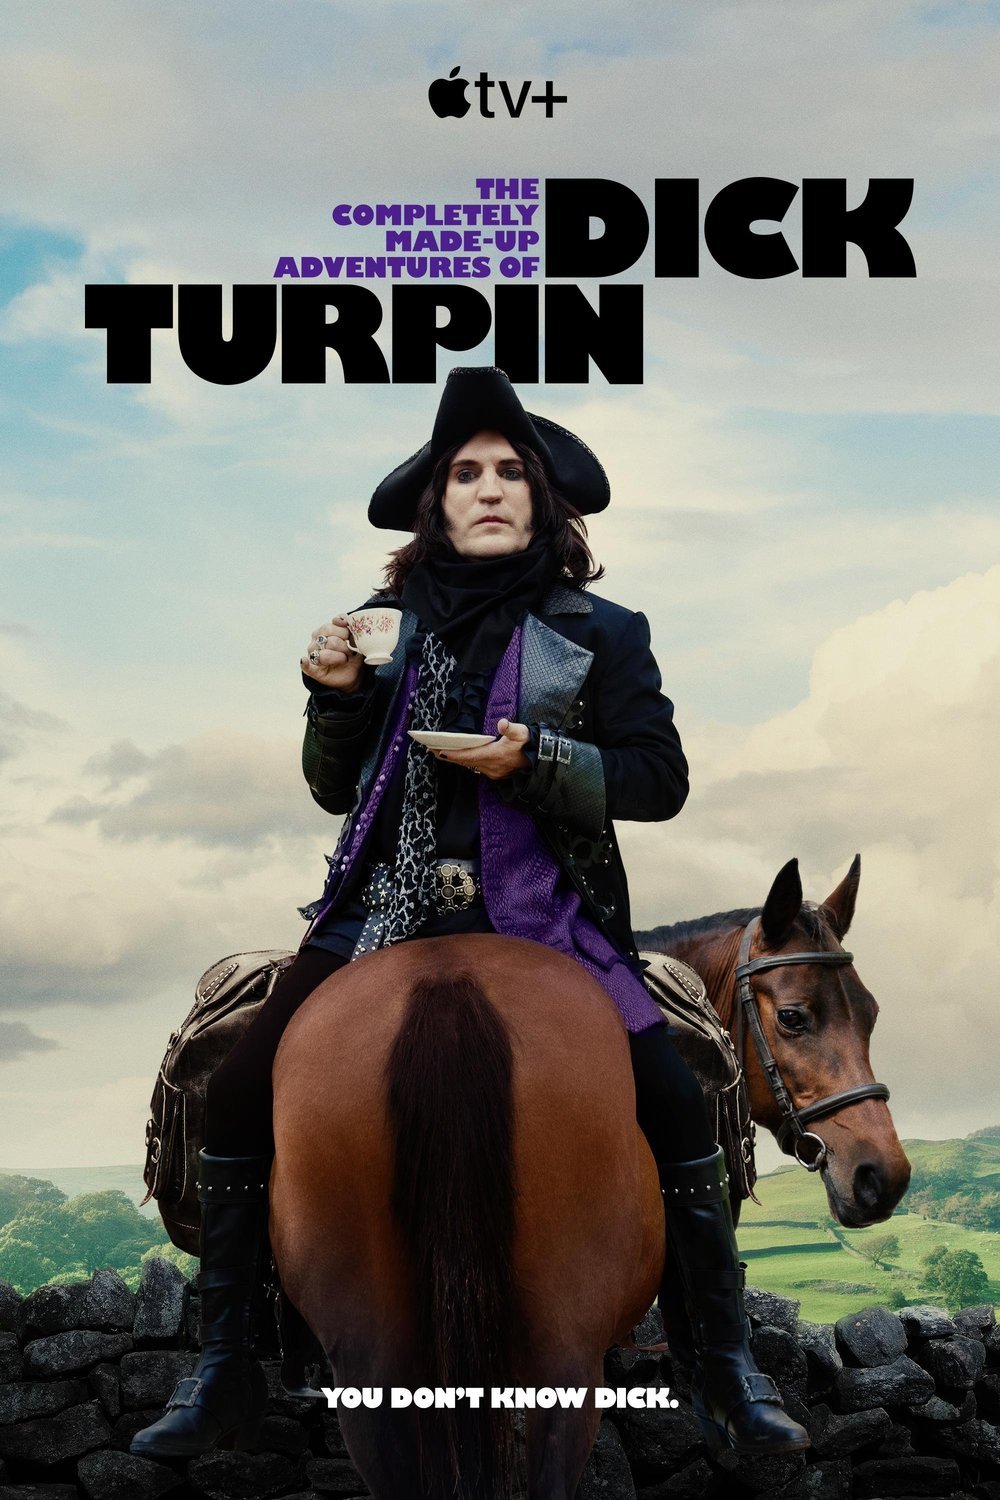 L'affiche du film The Completely Made-Up Adventures of Dick Turpin